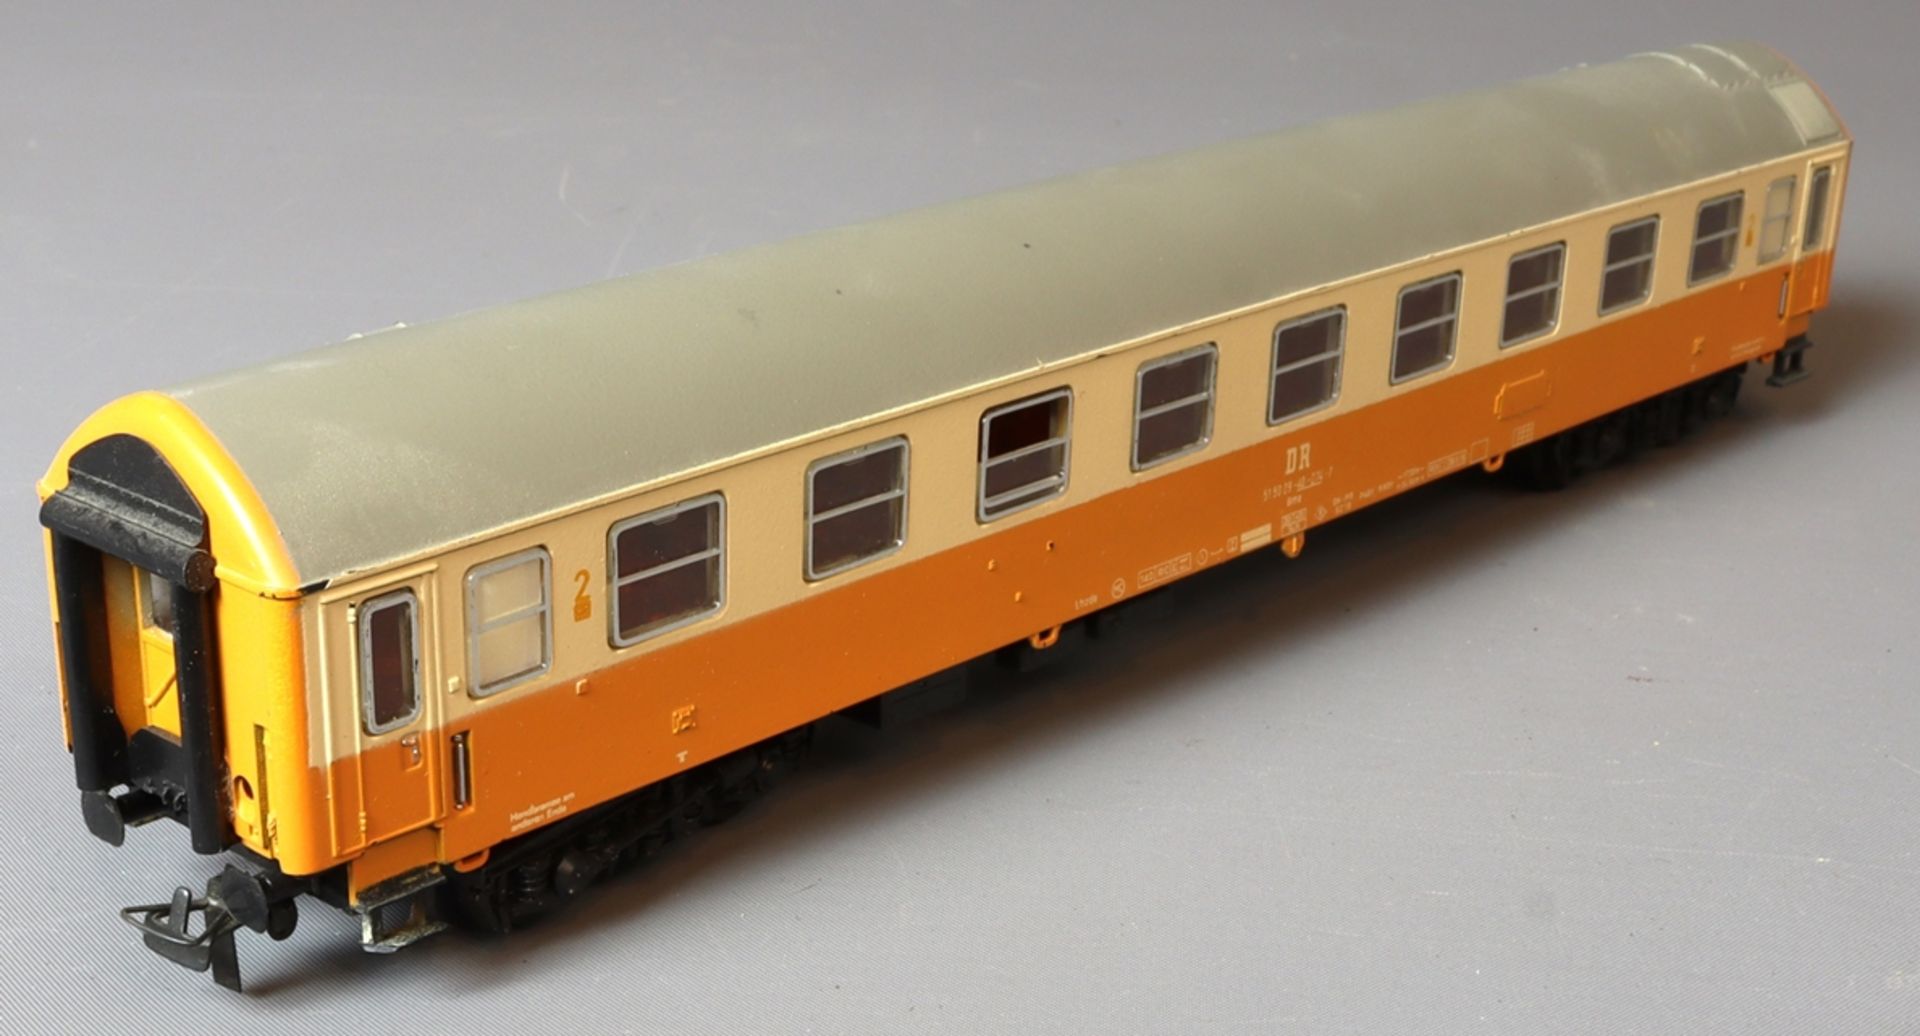 PIKO wagon 51 50 29 - 40- 274-7, city express, second half of the 20th century, German - Image 2 of 3